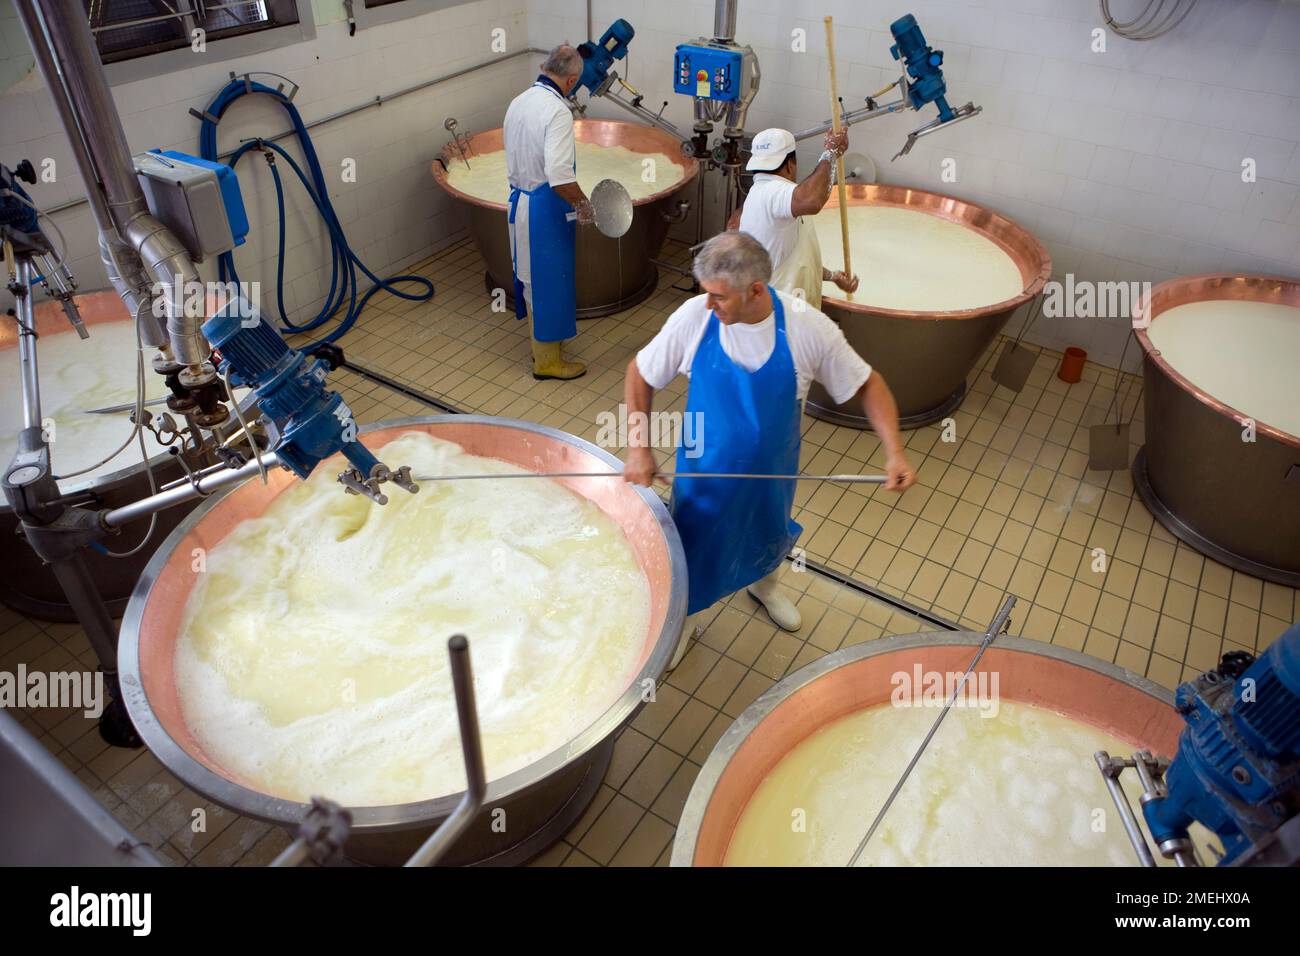 https://c8.alamy.com/comp/2MEHX0A/the-cheese-cooperative-in-tracasali-in-the-process-of-making-parmesan-cheese-2MEHX0A.jpg